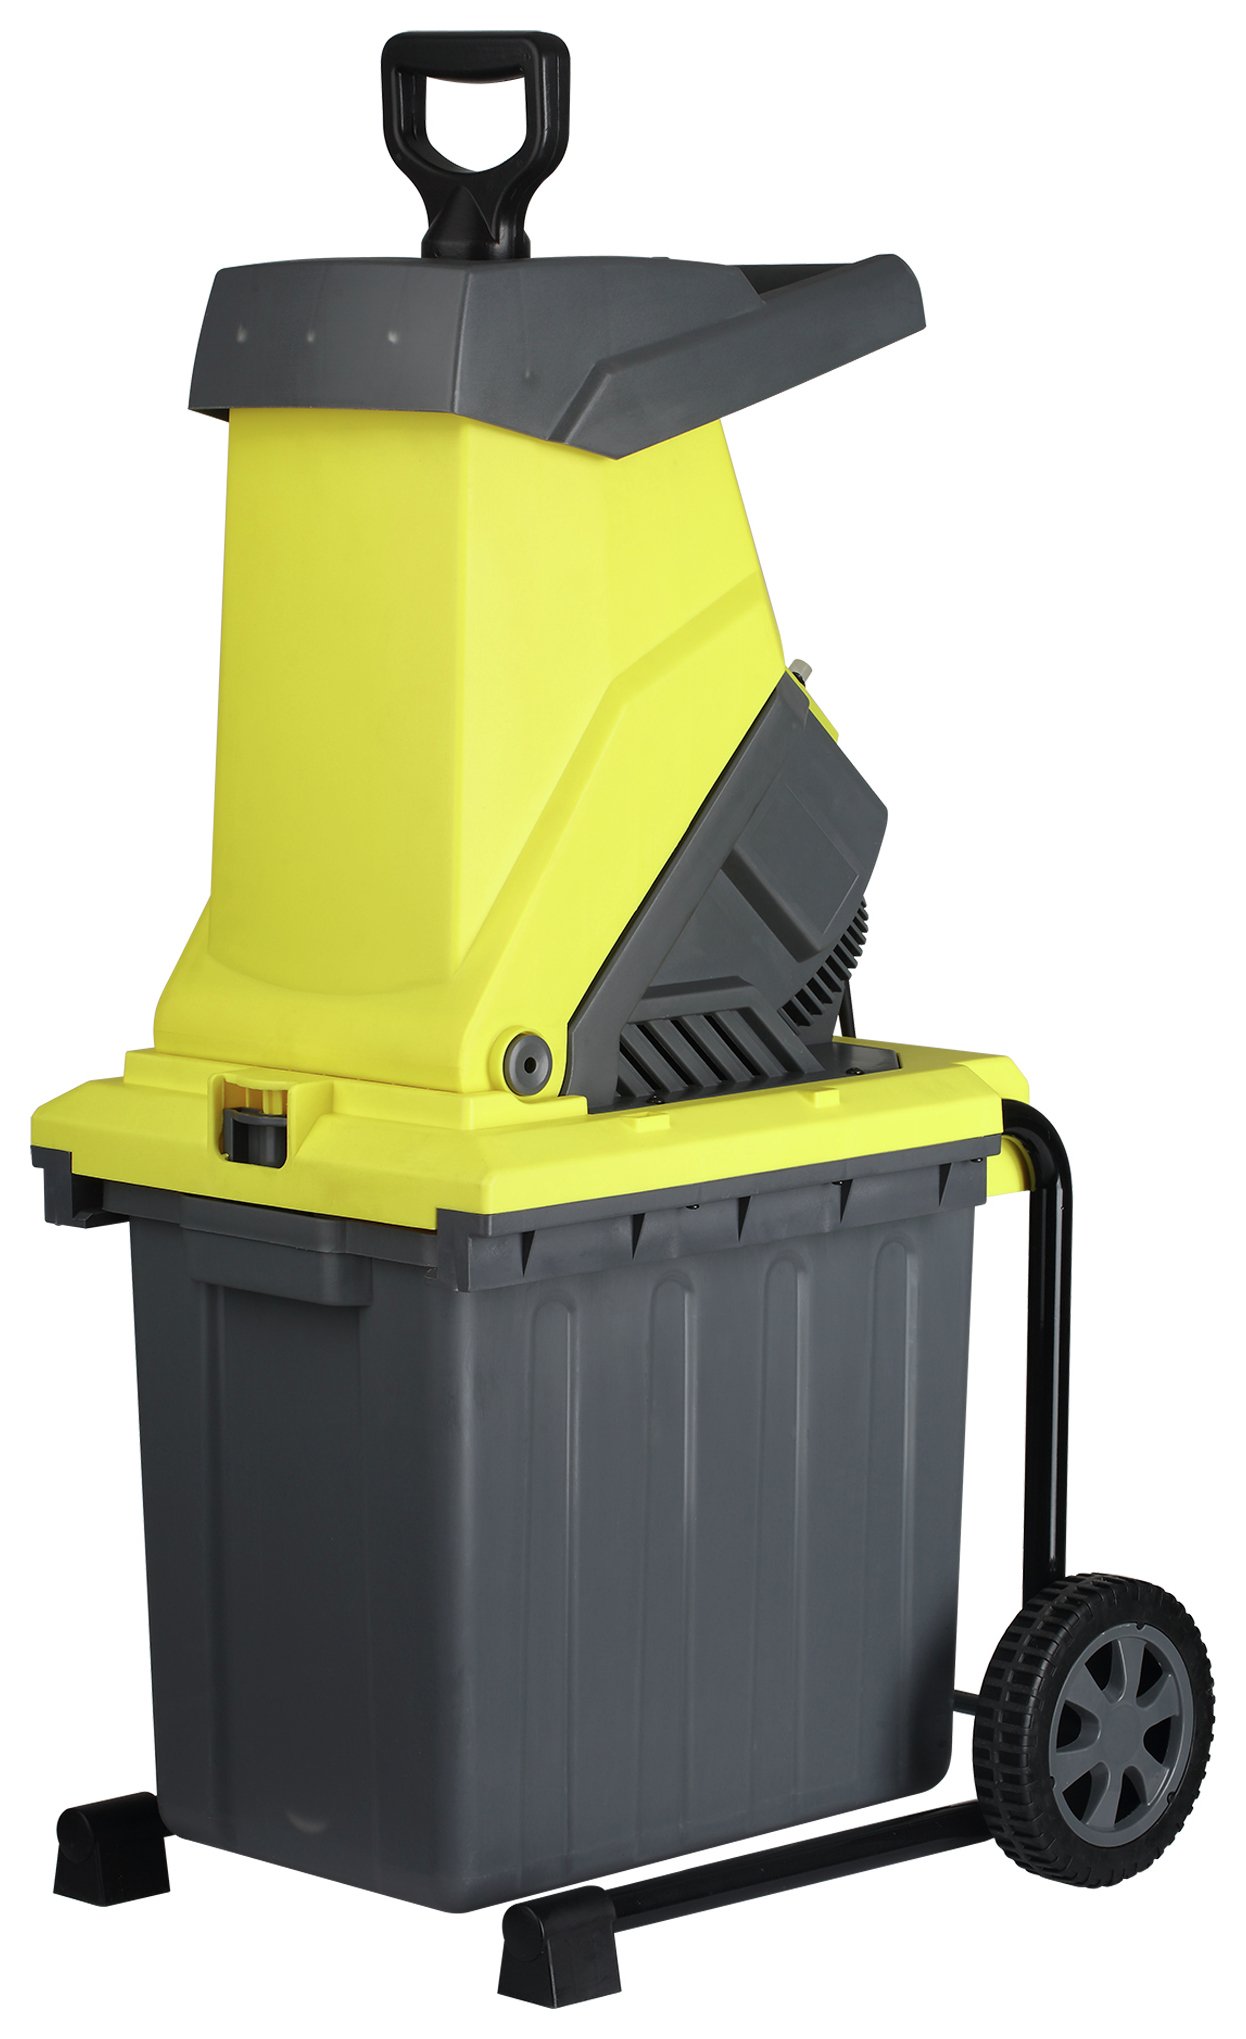 Review of Challenge Heavy Duty Impact Shredder - 2500W